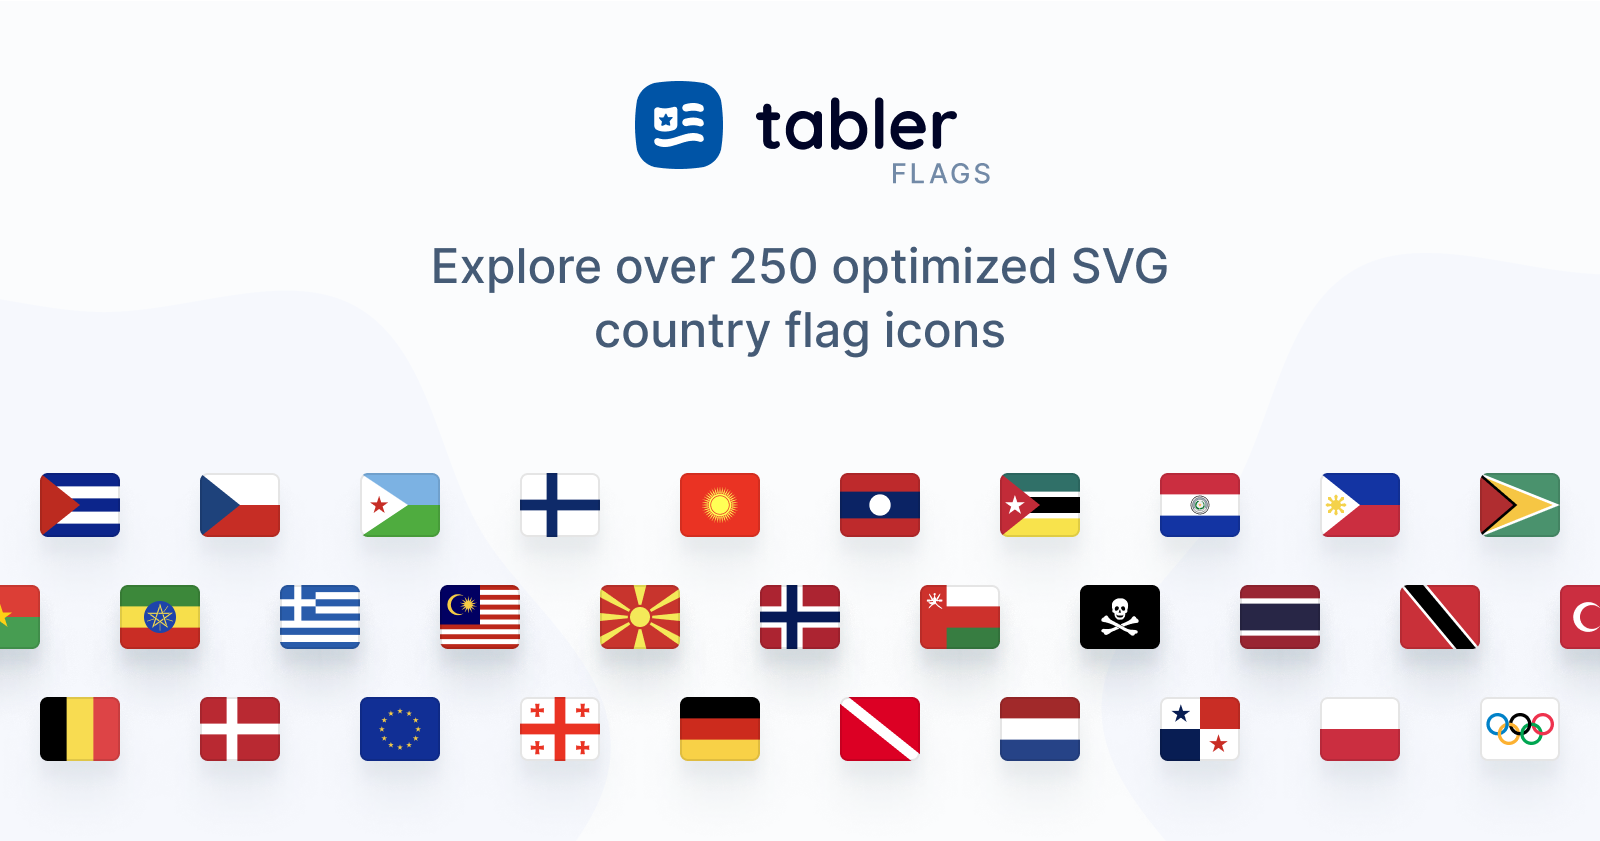 Tabler Flags